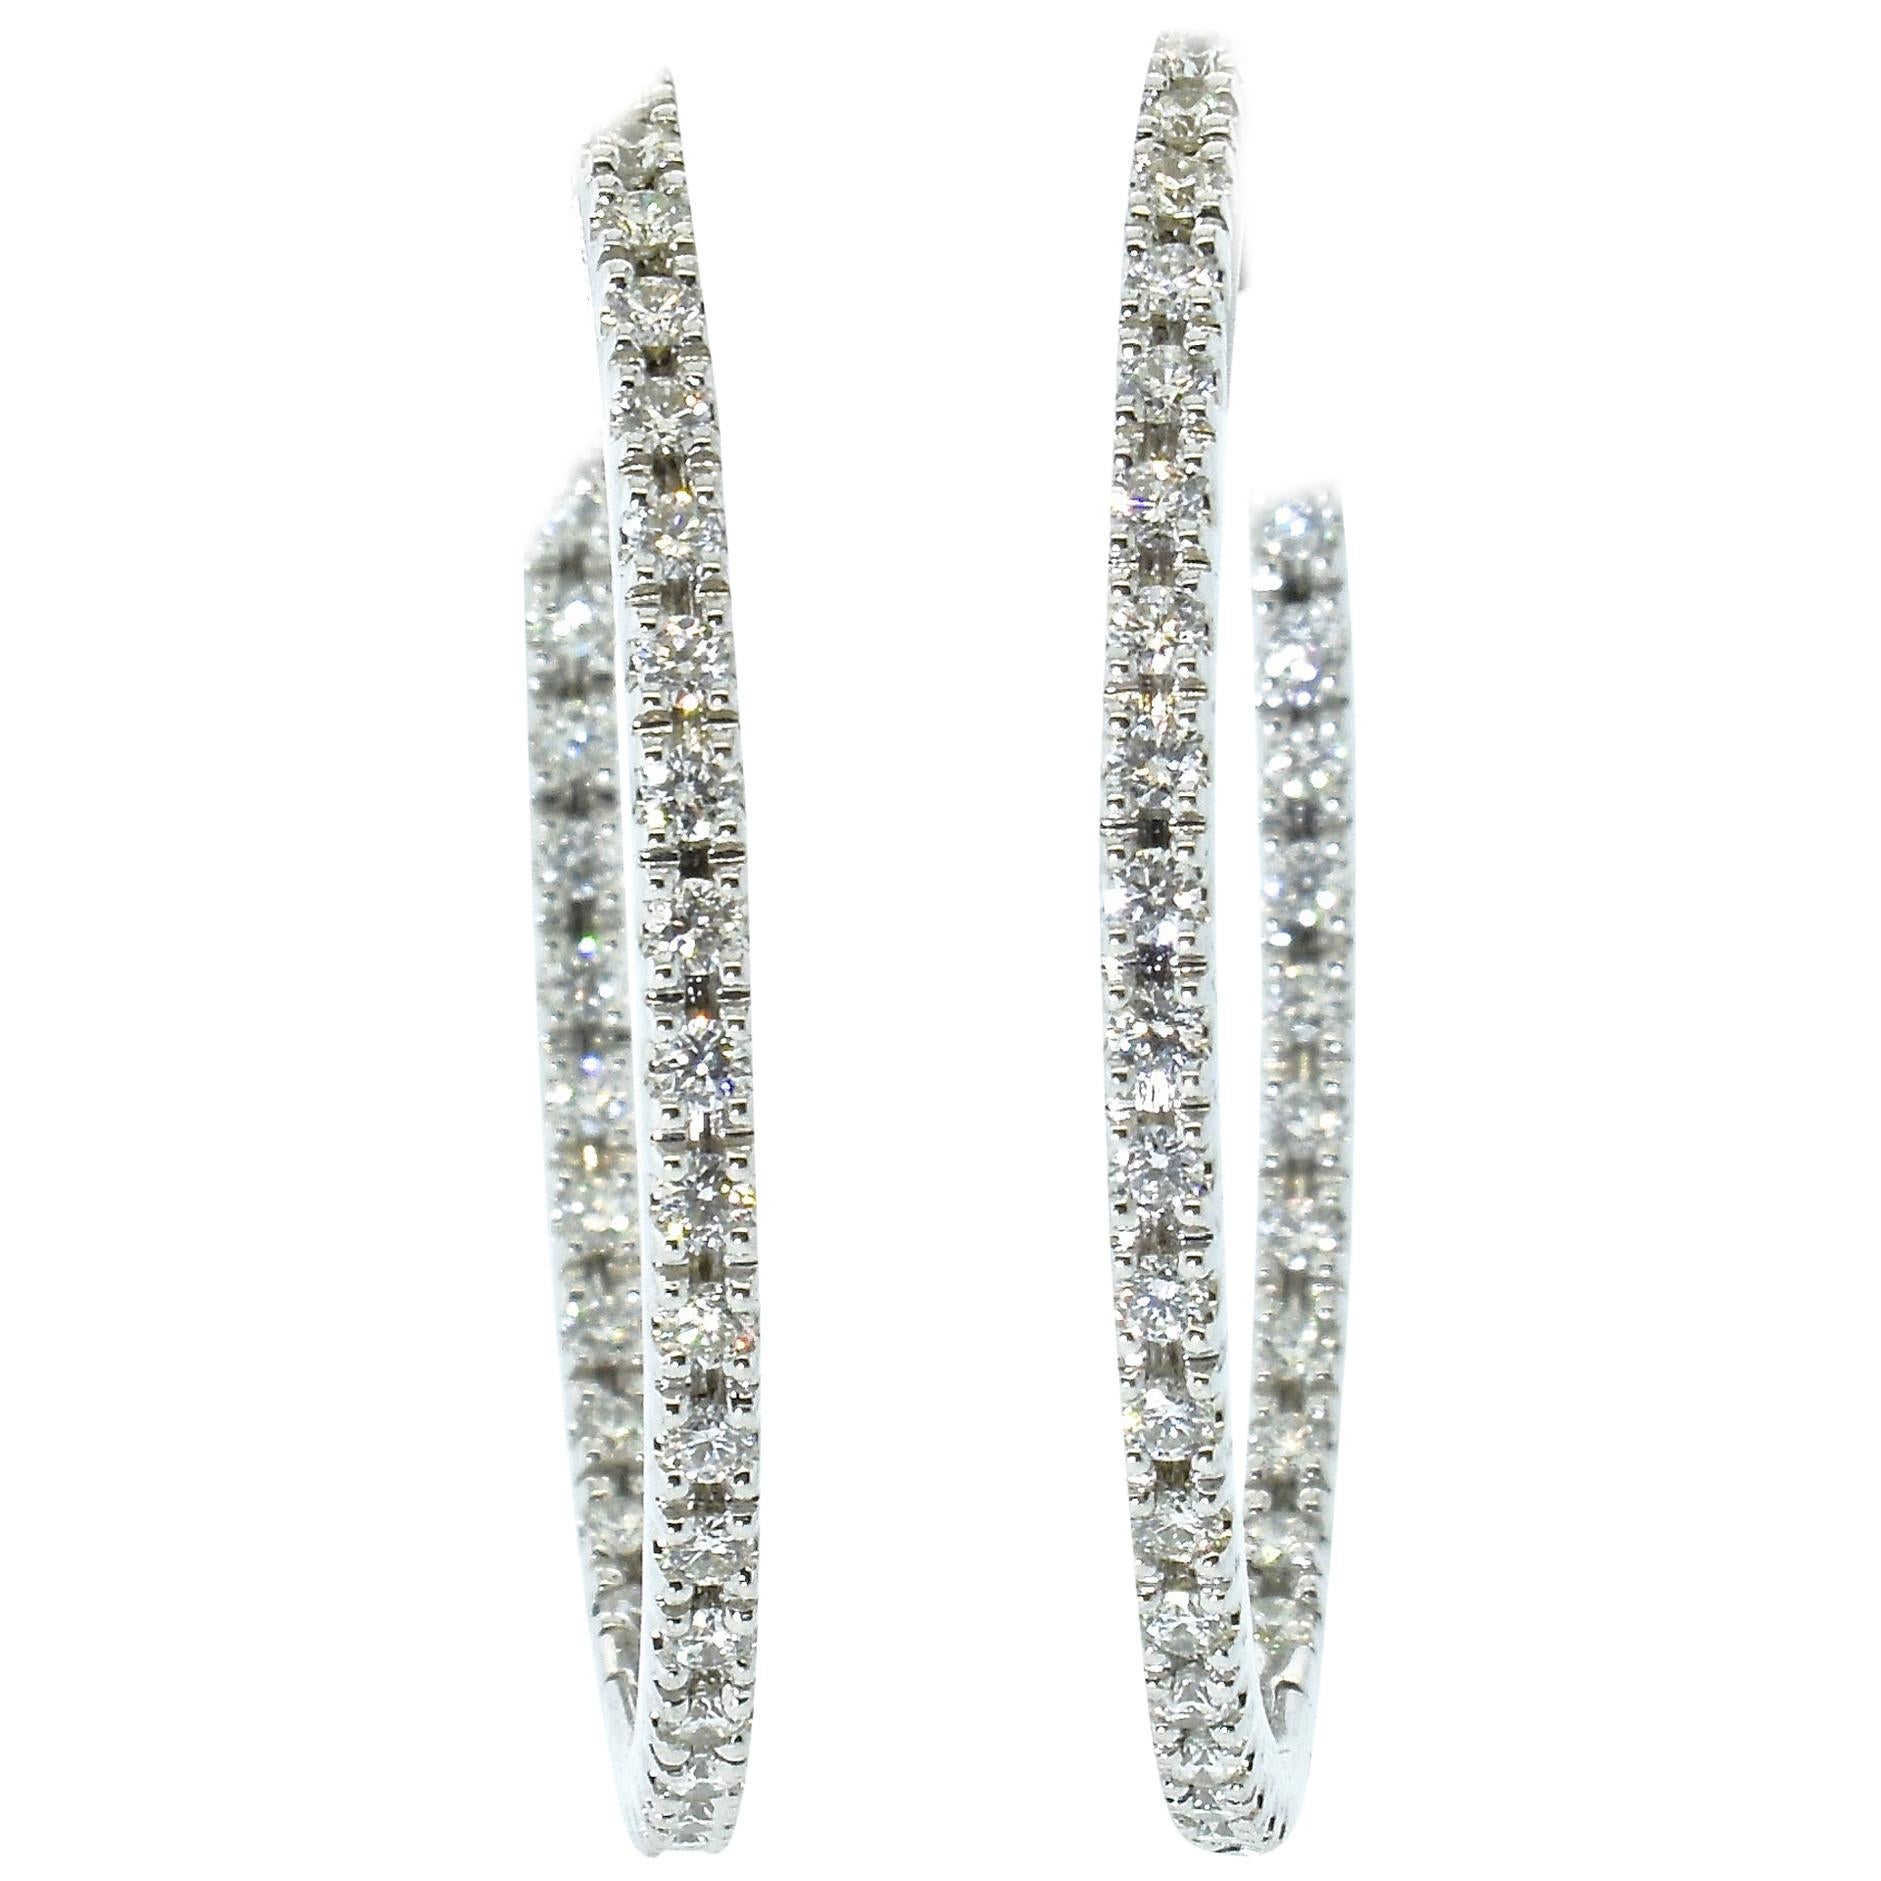 Diamond hoops in 18K white gold, with 74 round fine brilliant cut diamonds, bead set, all well matched and finely cut.  The diamonds are all near colorless (G/H), and very slightly included (VS).  The diamond weight is 1.50 cts.    Diamonds are set